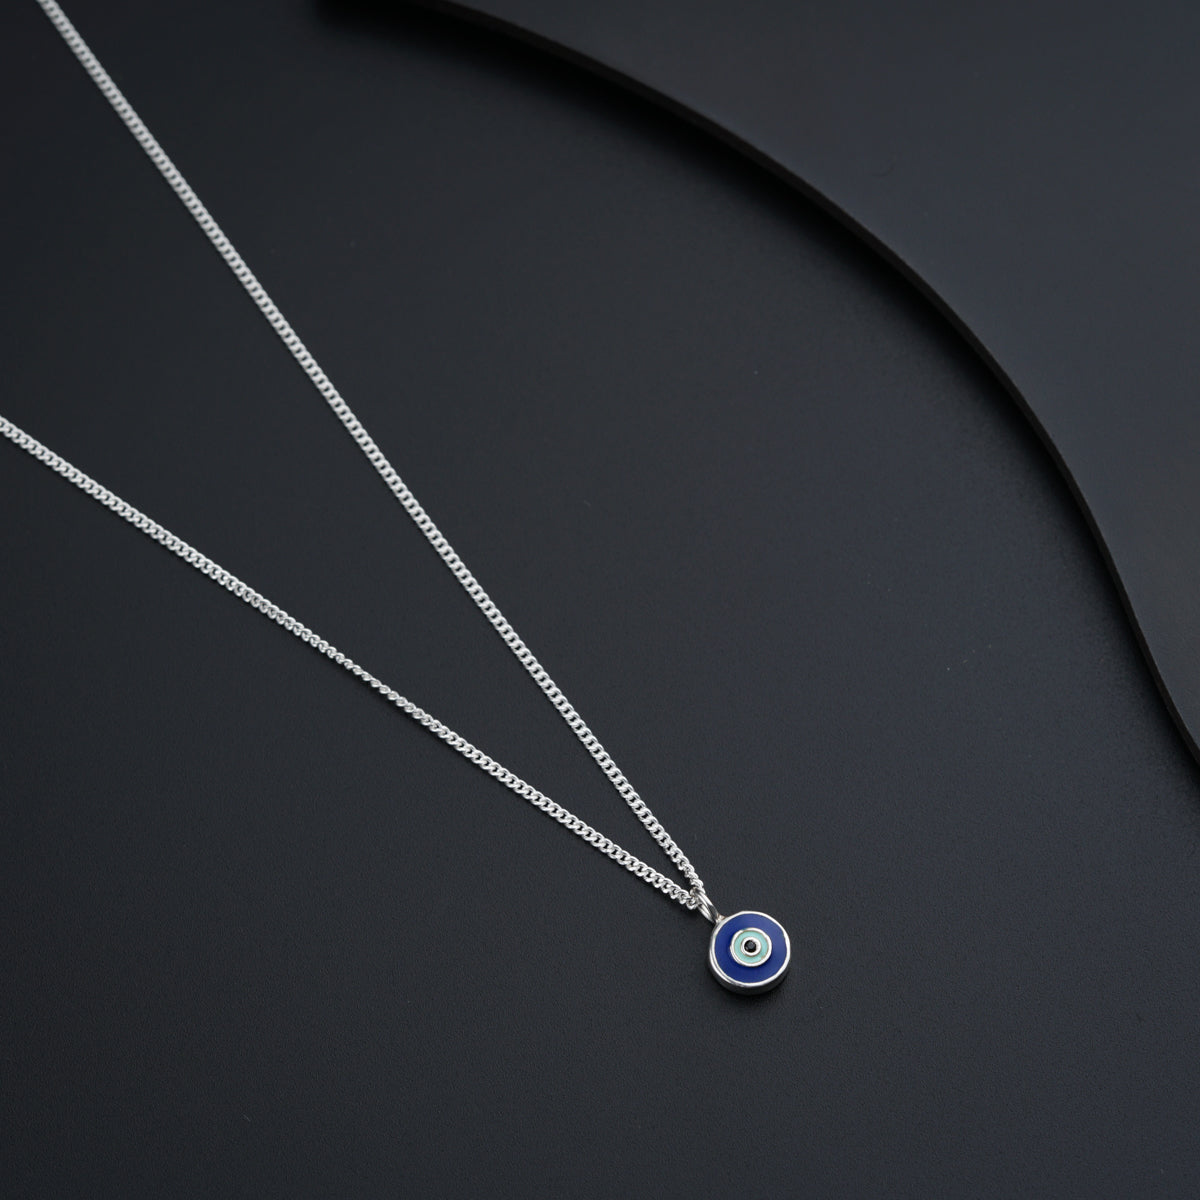 Silver Necklace with Evil Eye Pendant